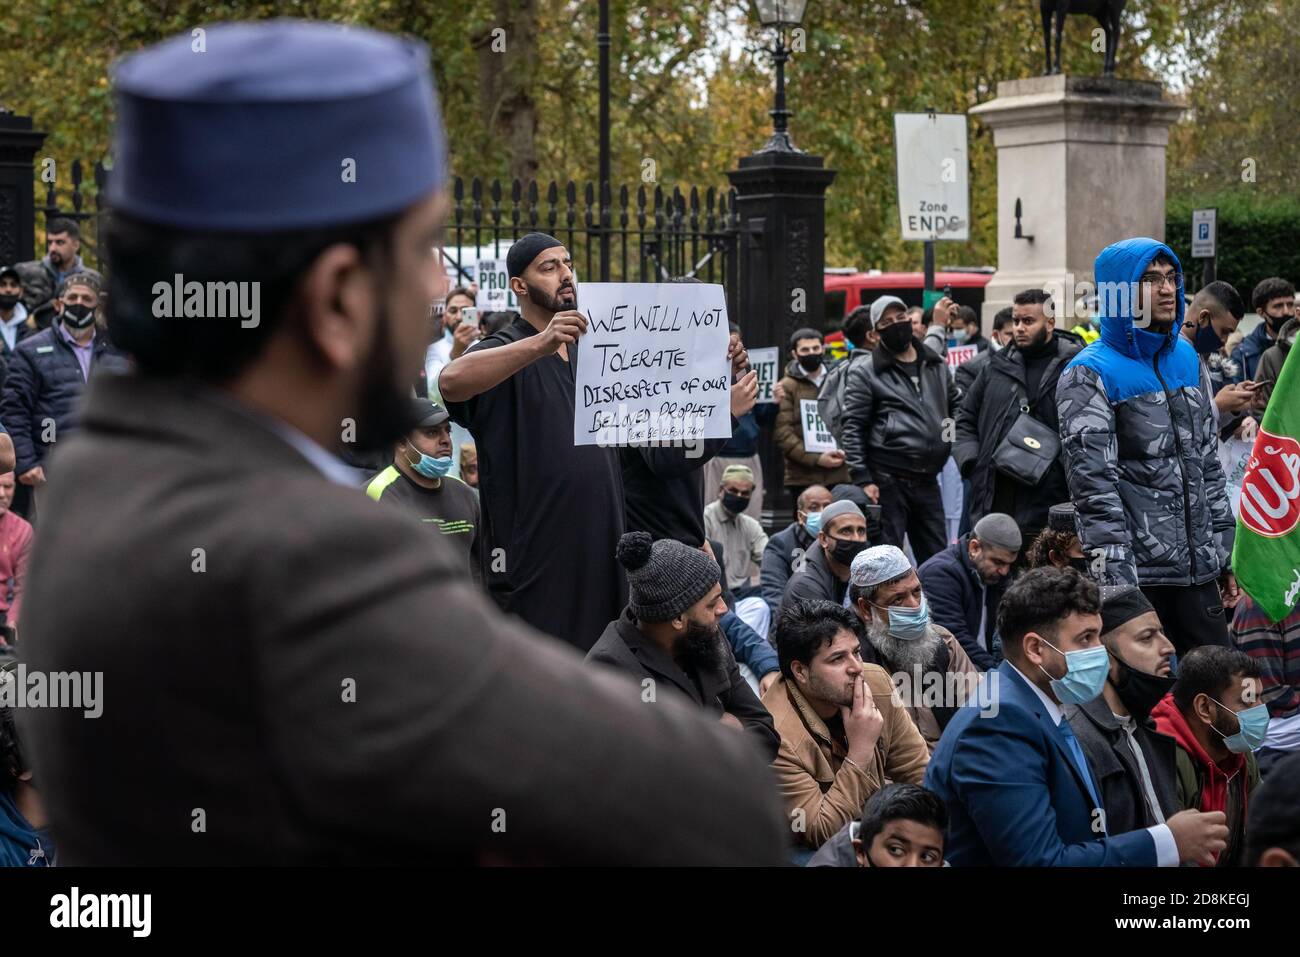 Hundreds of British Muslims protest outside the French Embassy in London against the satirical anti-muslim cartoons published by Charlie Hebdo. Stock Photo